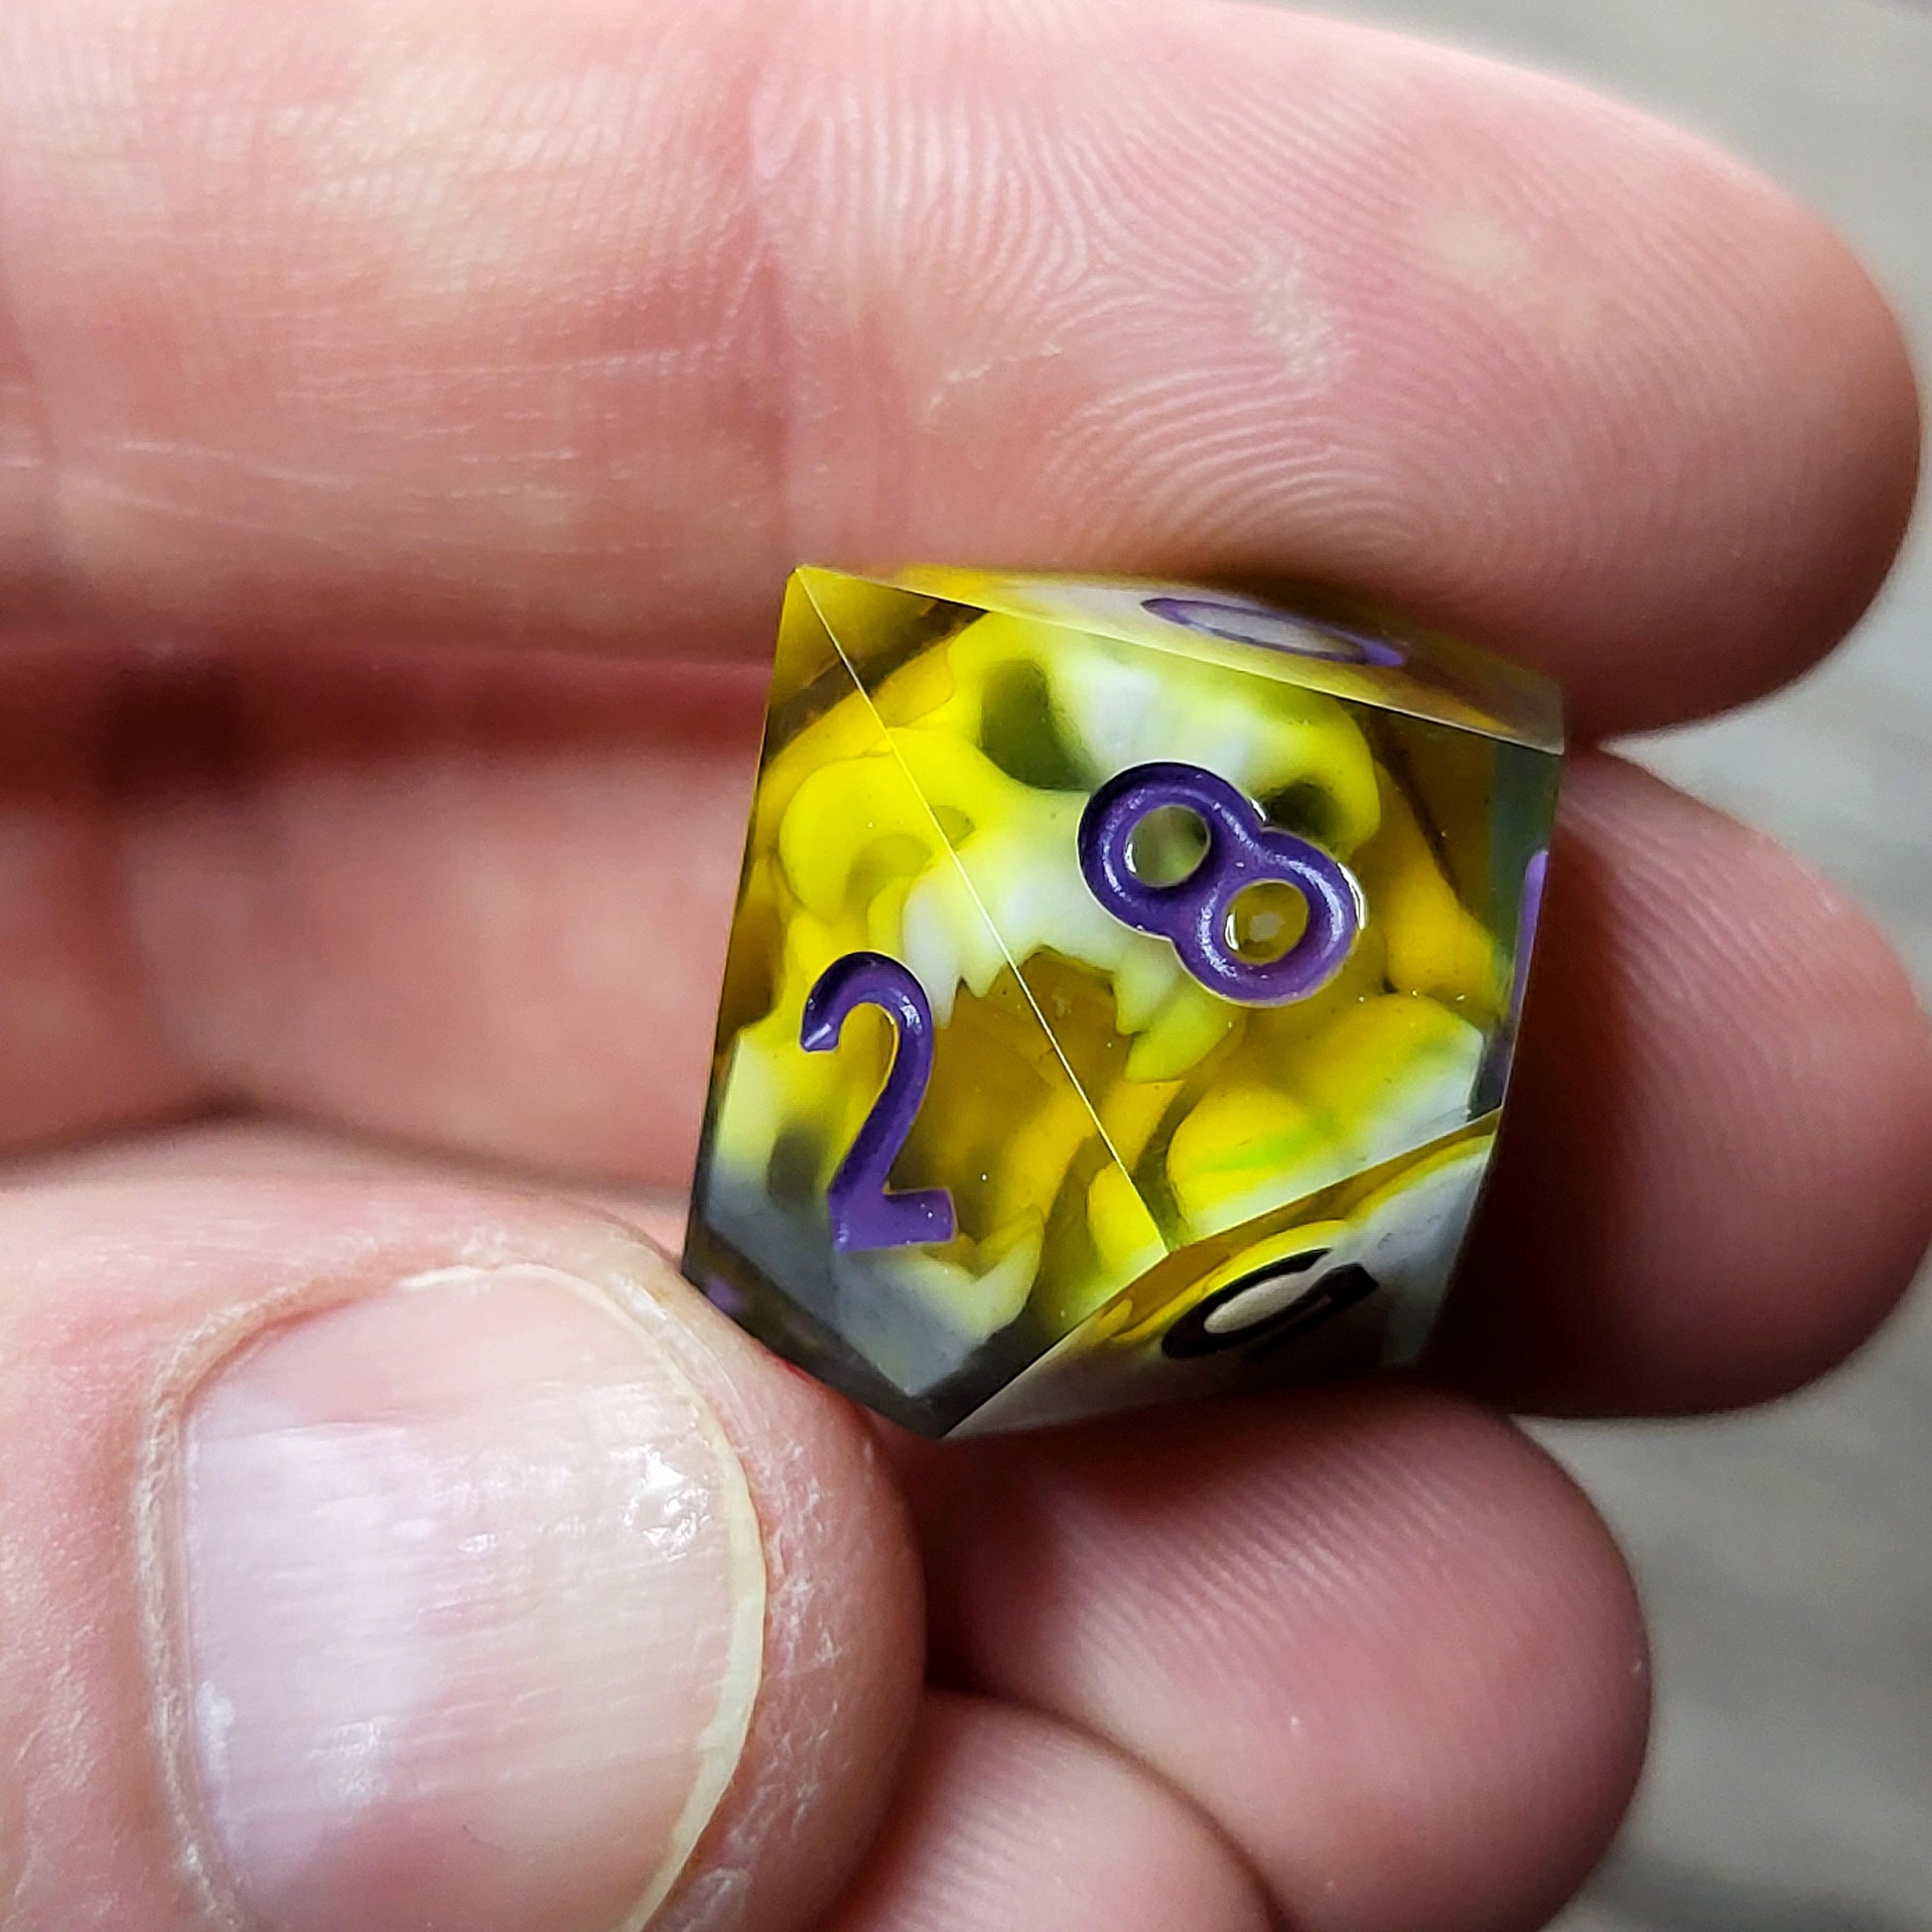 Dice set for role playing for Dungeons and Dragons